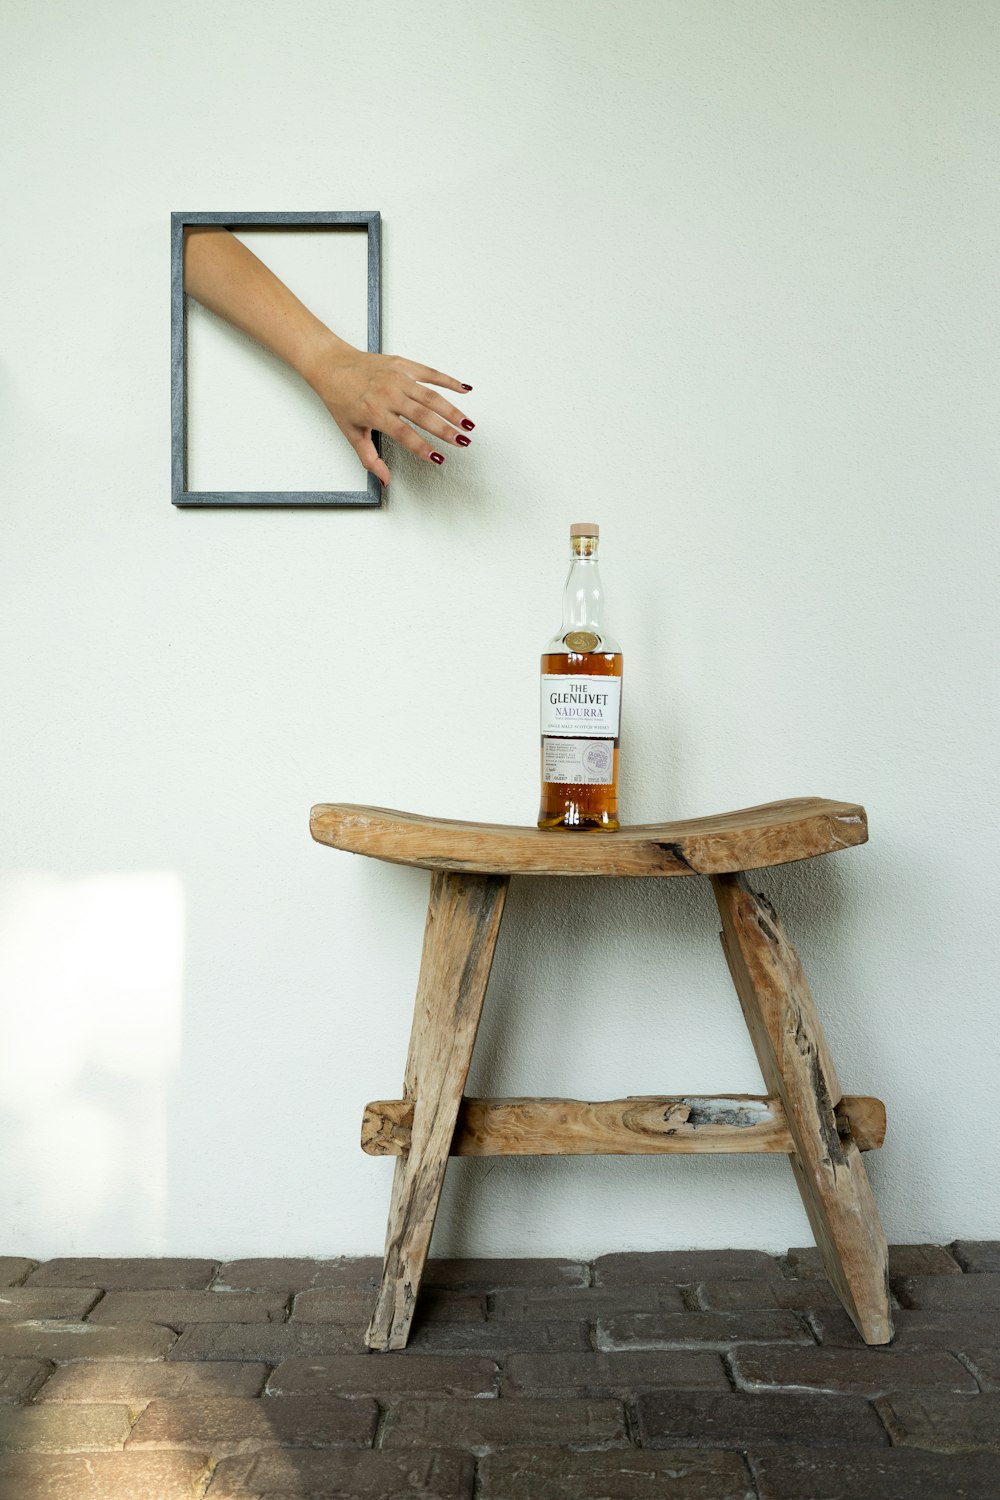 a bottle of alcohol on a wooden bench